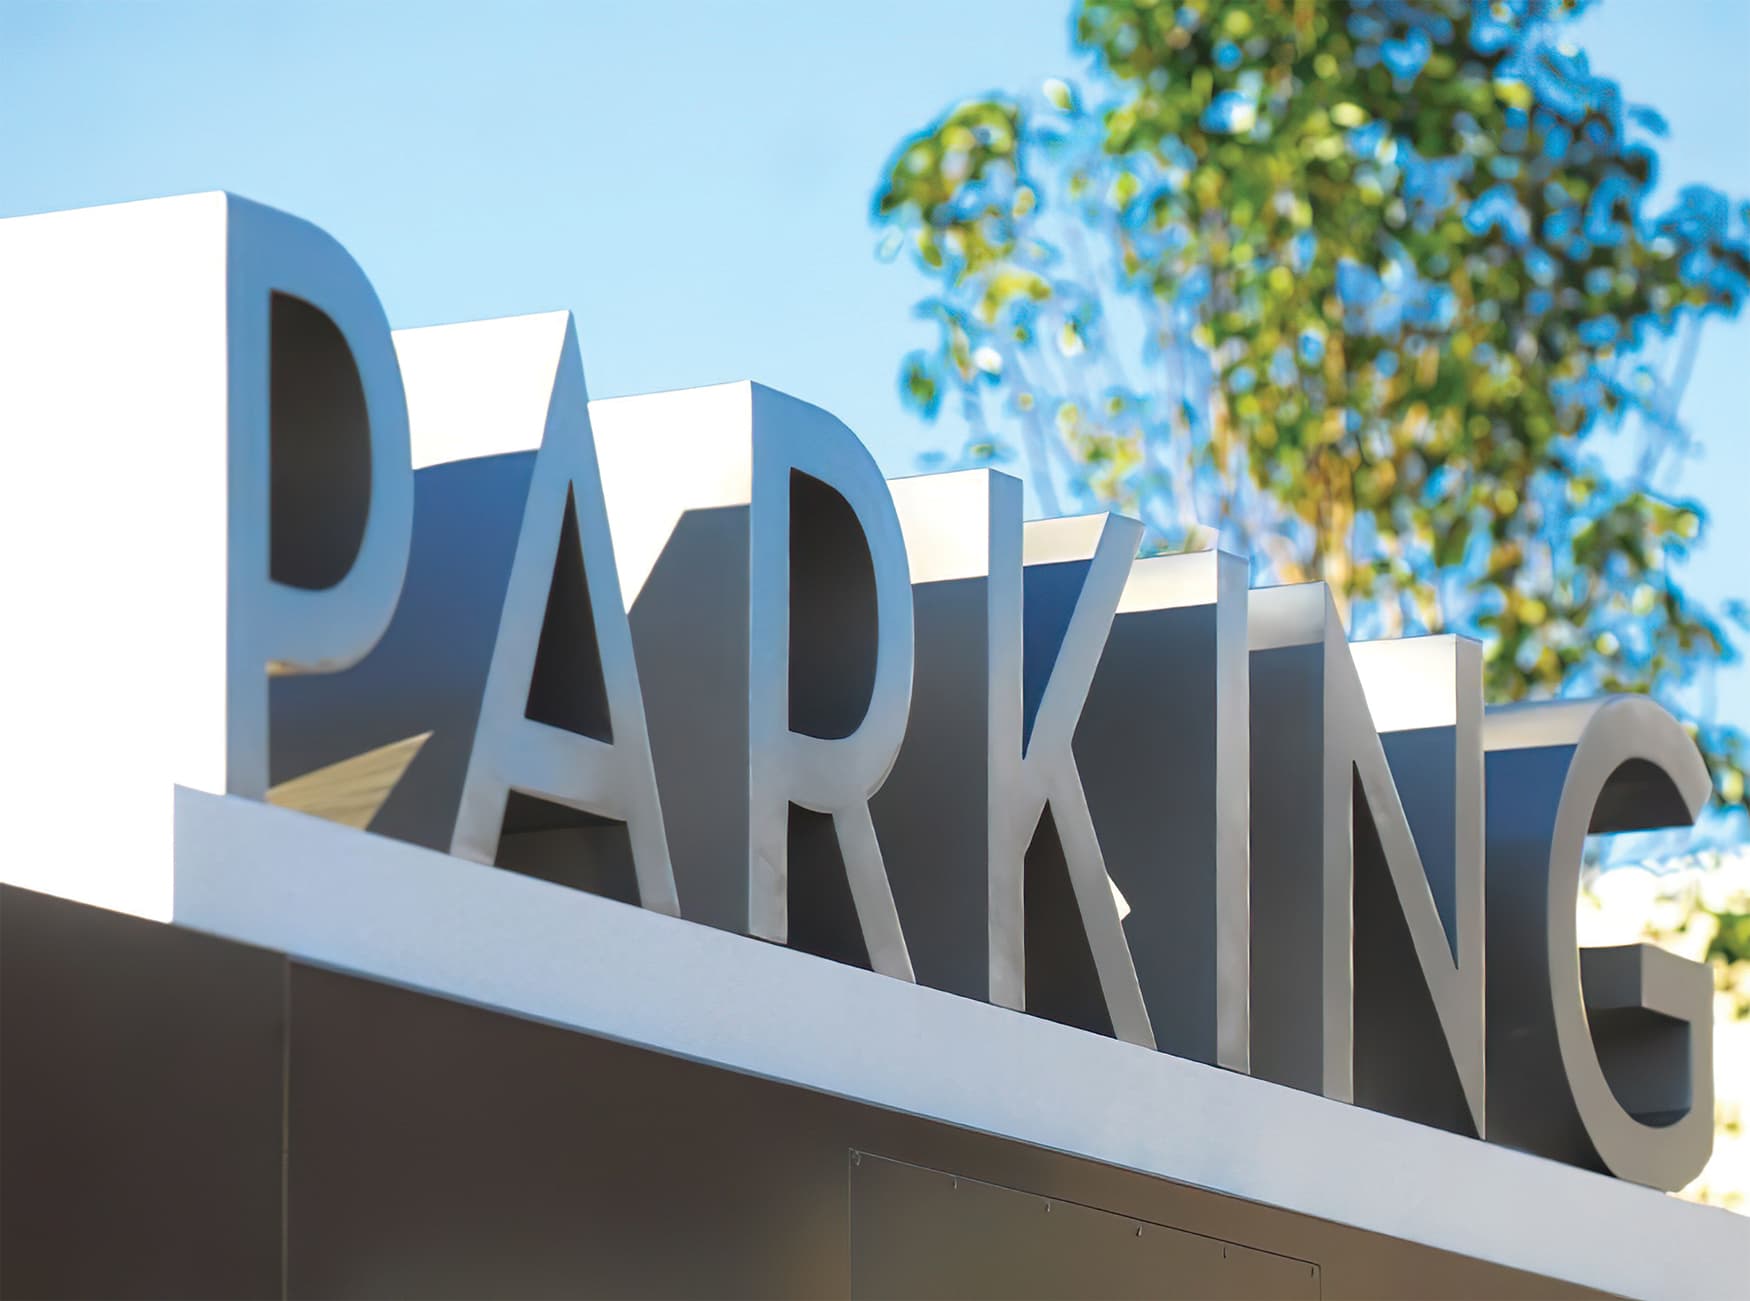 Natick Collection, New England's largest mixed-use retail destination, commissioned RSM Design to create a brand identity as well as a placemaking, identity, and wayfinding features. Parking Signage. 